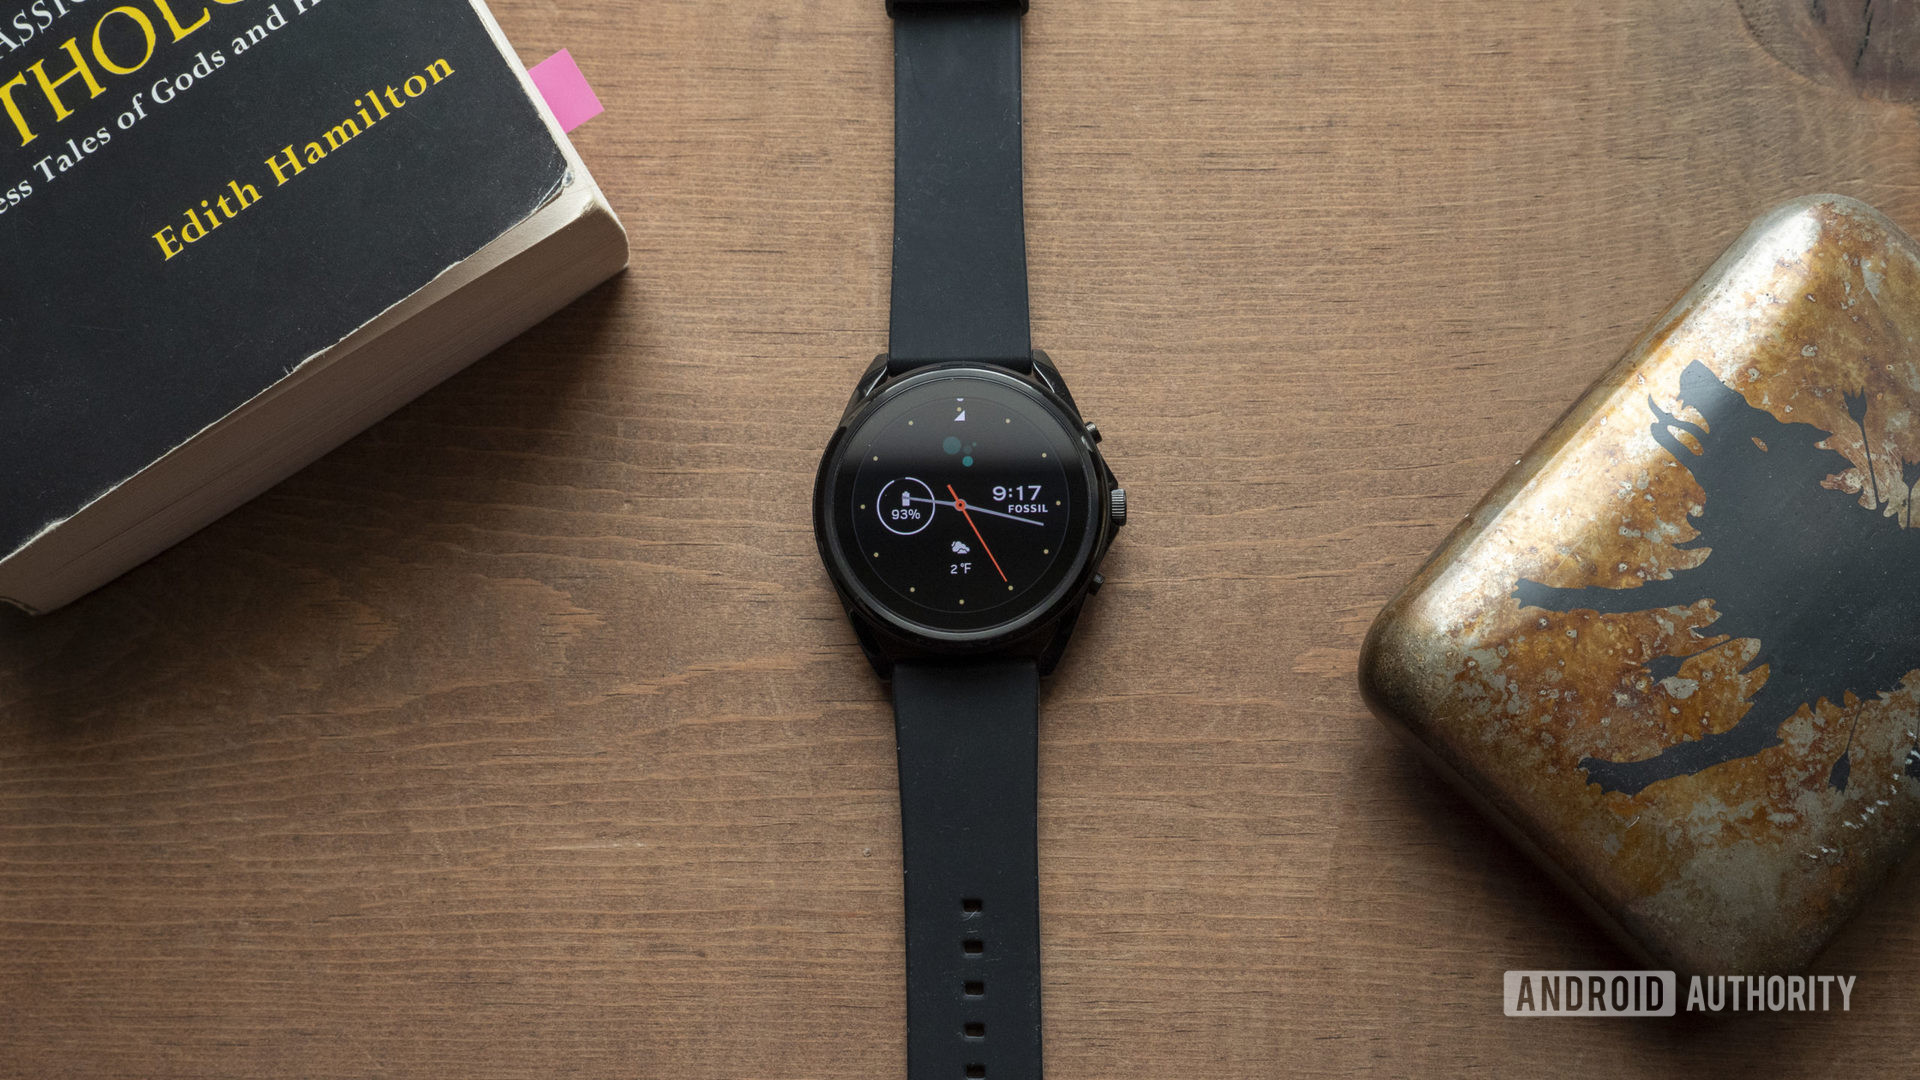 Smartwatches - Generation 5 LTE - Fossil